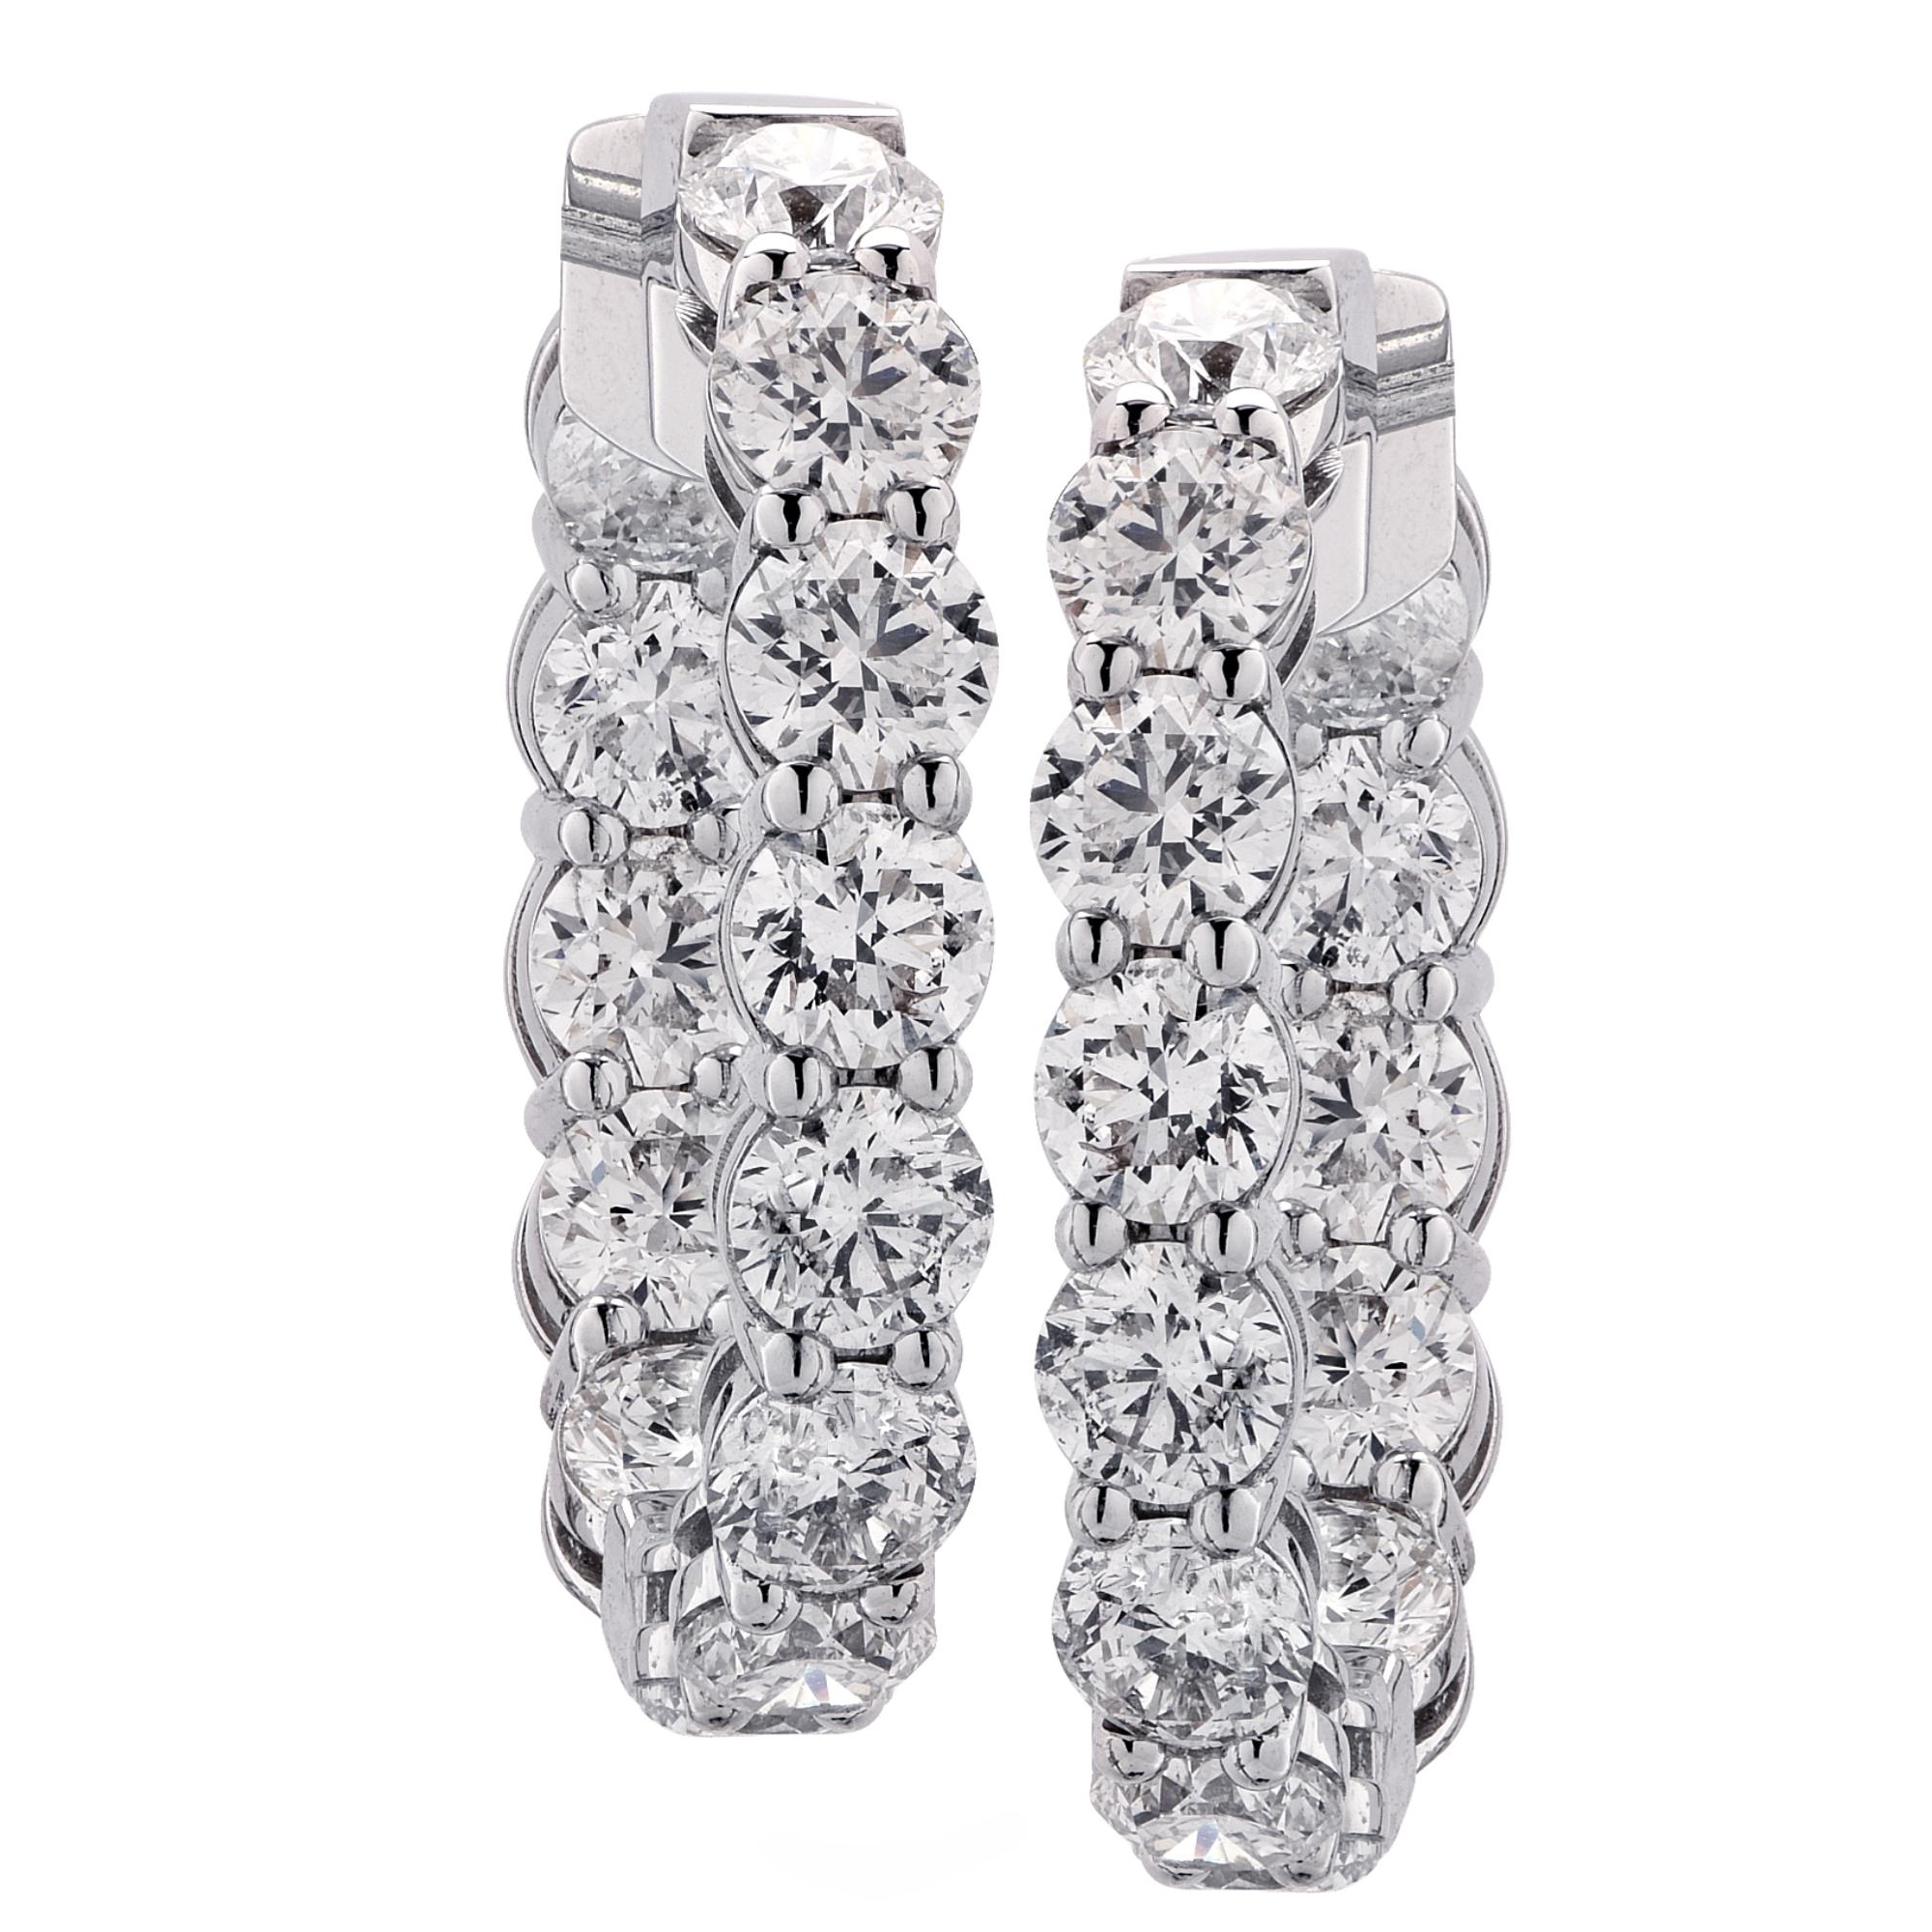 Beautiful awe inspiring 18k white gold diamond hoop earrings featuring 26 round brilliant cut diamonds weighing 10.73cts total, H color, VS- SI Clarity. These earrings measure 1.15 inches by 1 inch and measure 4.8mm wide. These magnificently